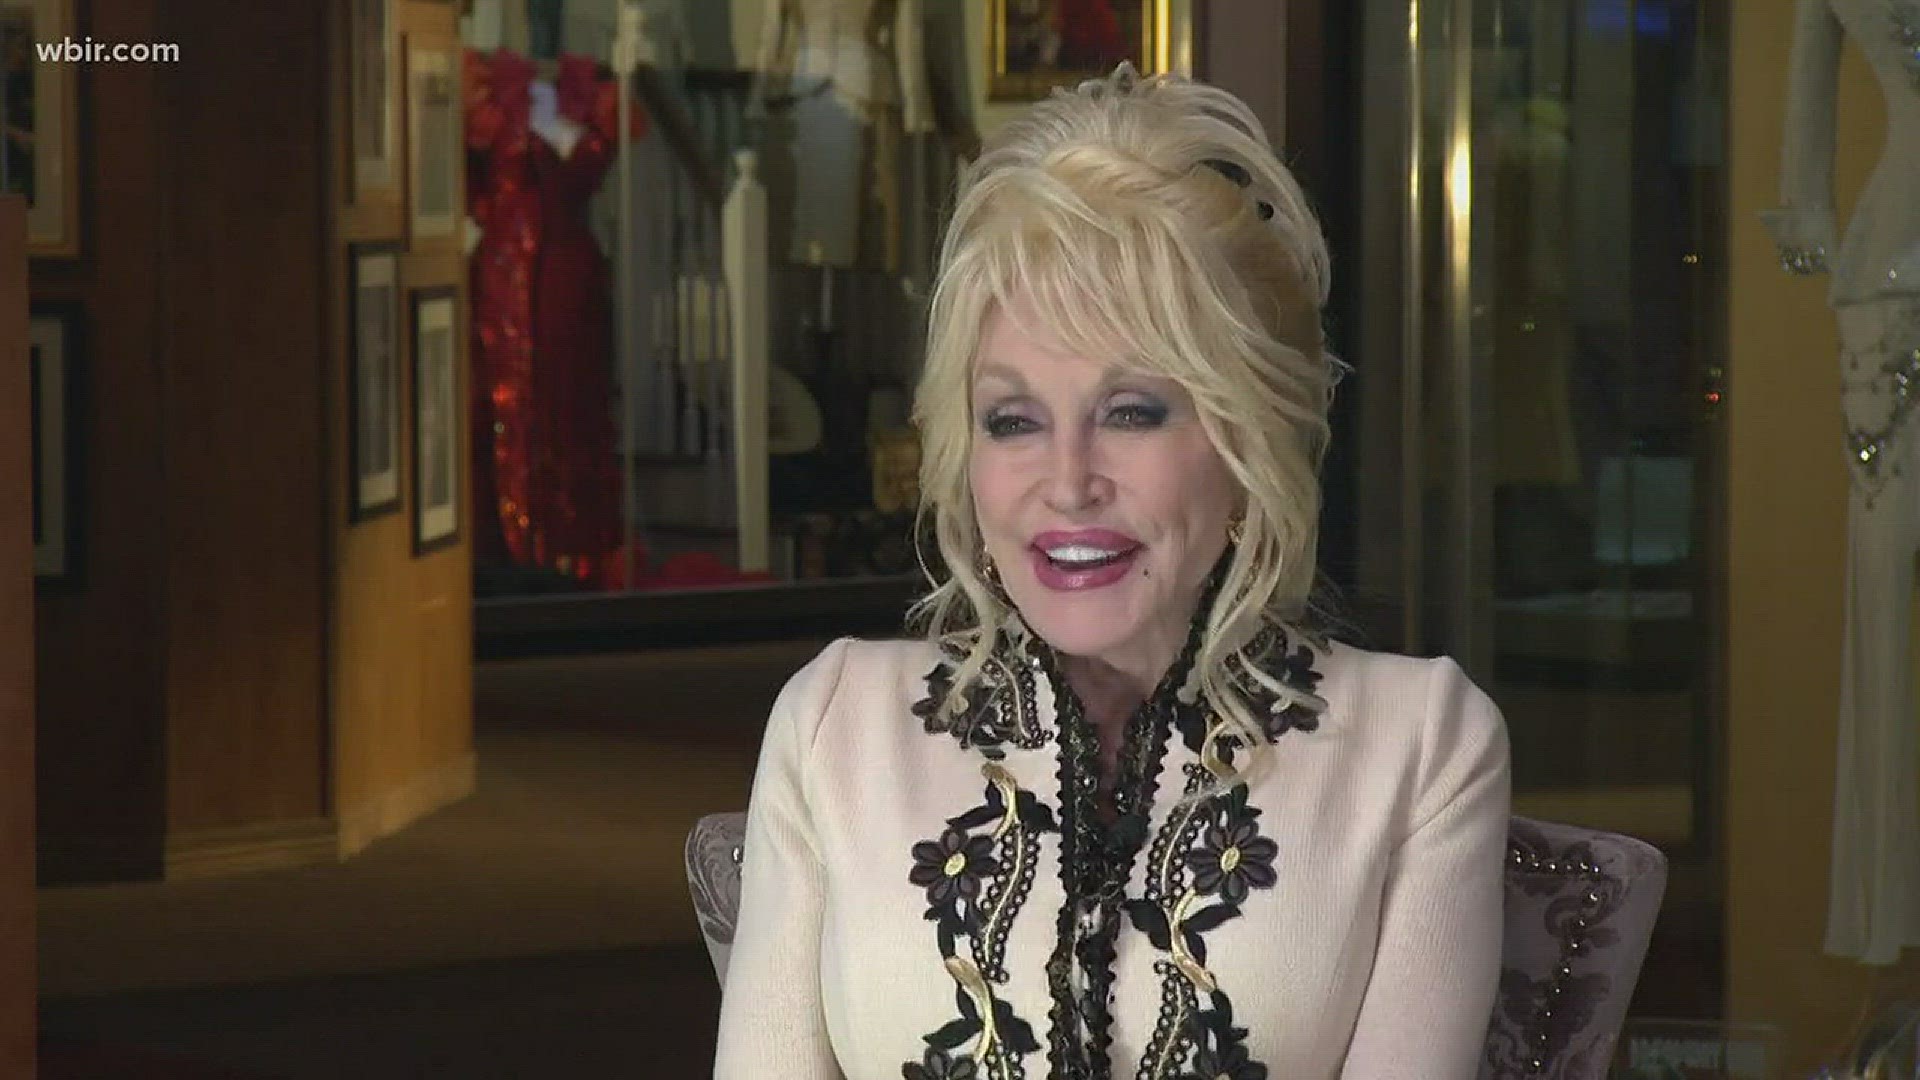 Dolly Parton sits down to talk about the future of Dollywood (modeling after Disney?), how the Imagination Library honors both her parents , a 9 to 5 sequel, a Jolene movie, & her biggest influences.